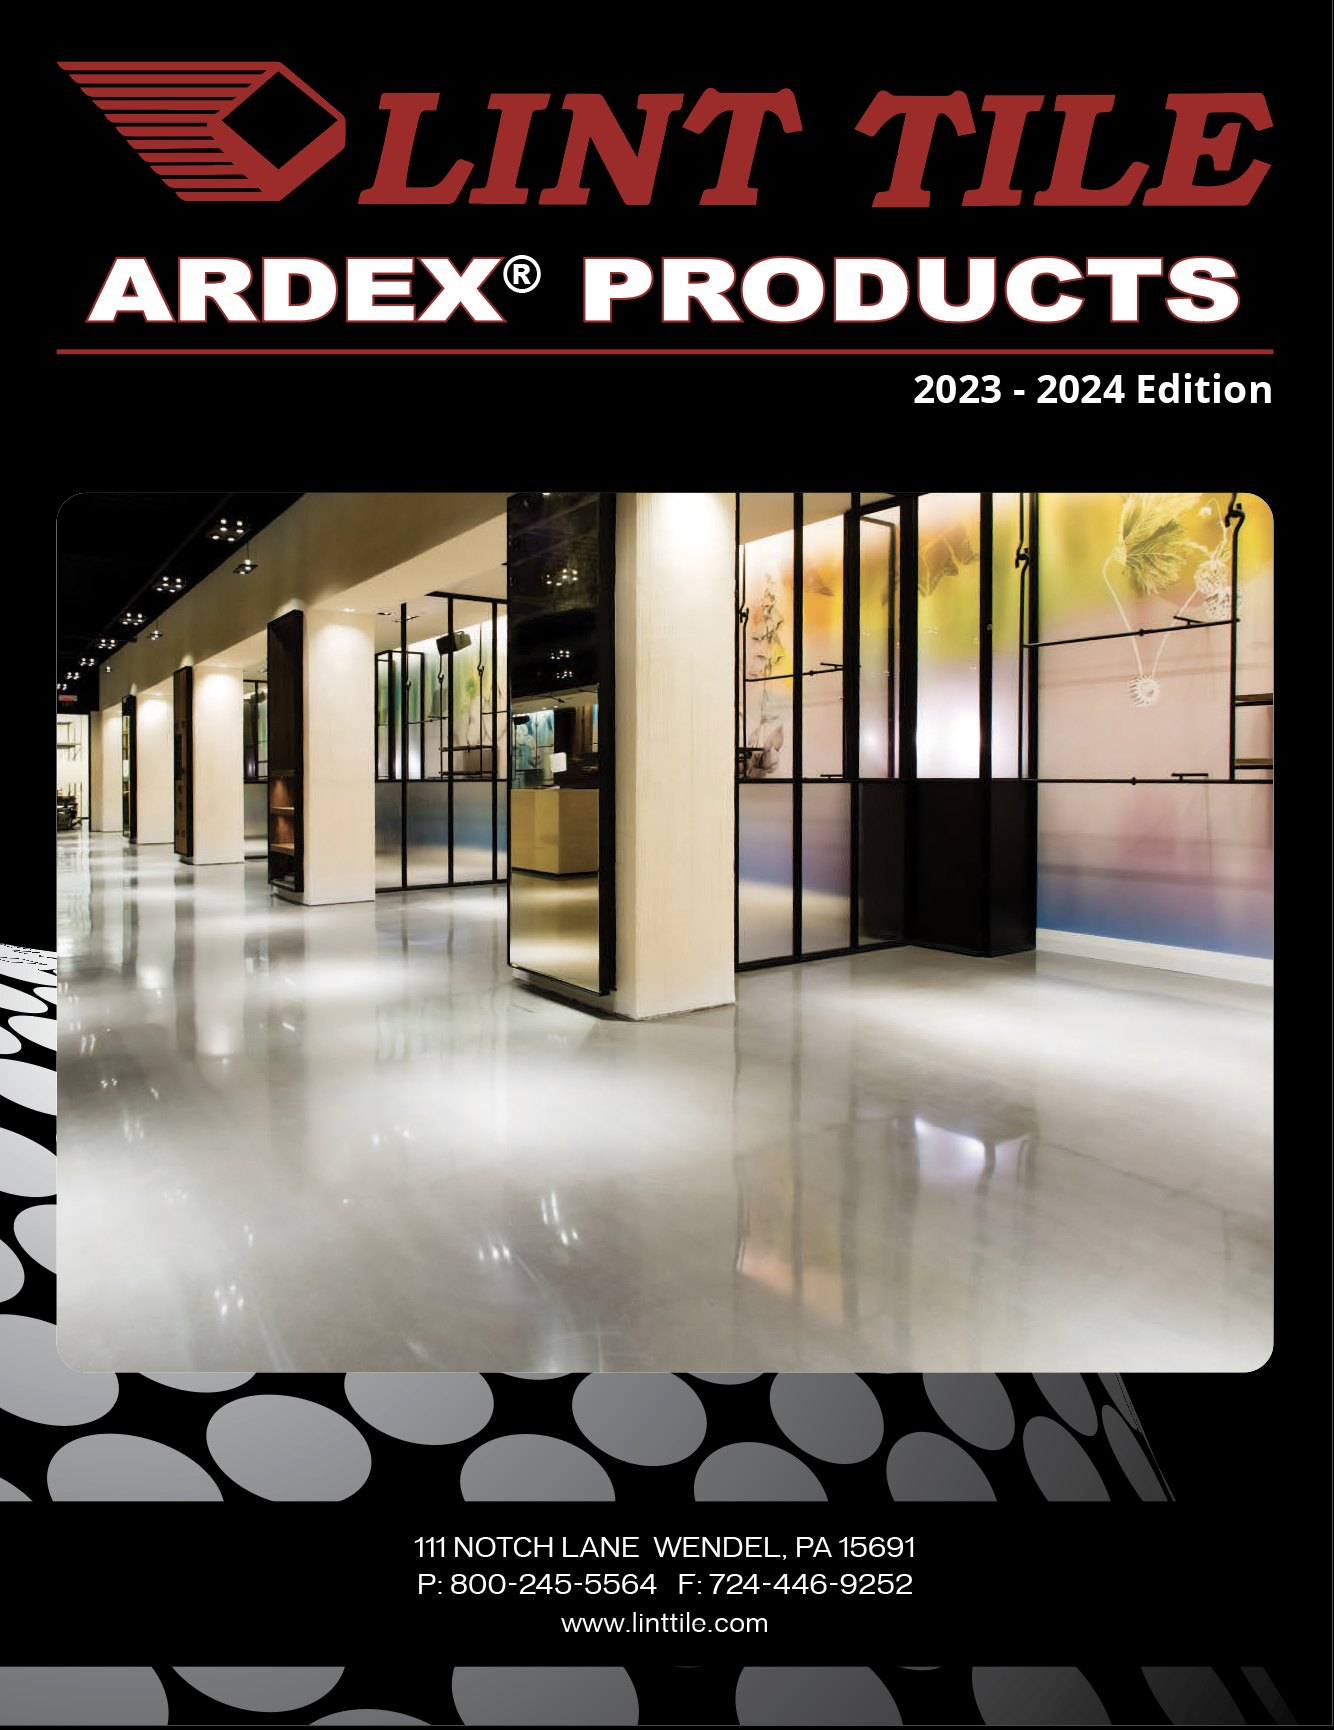 Lint Tile Ardex Products Cover 23-24